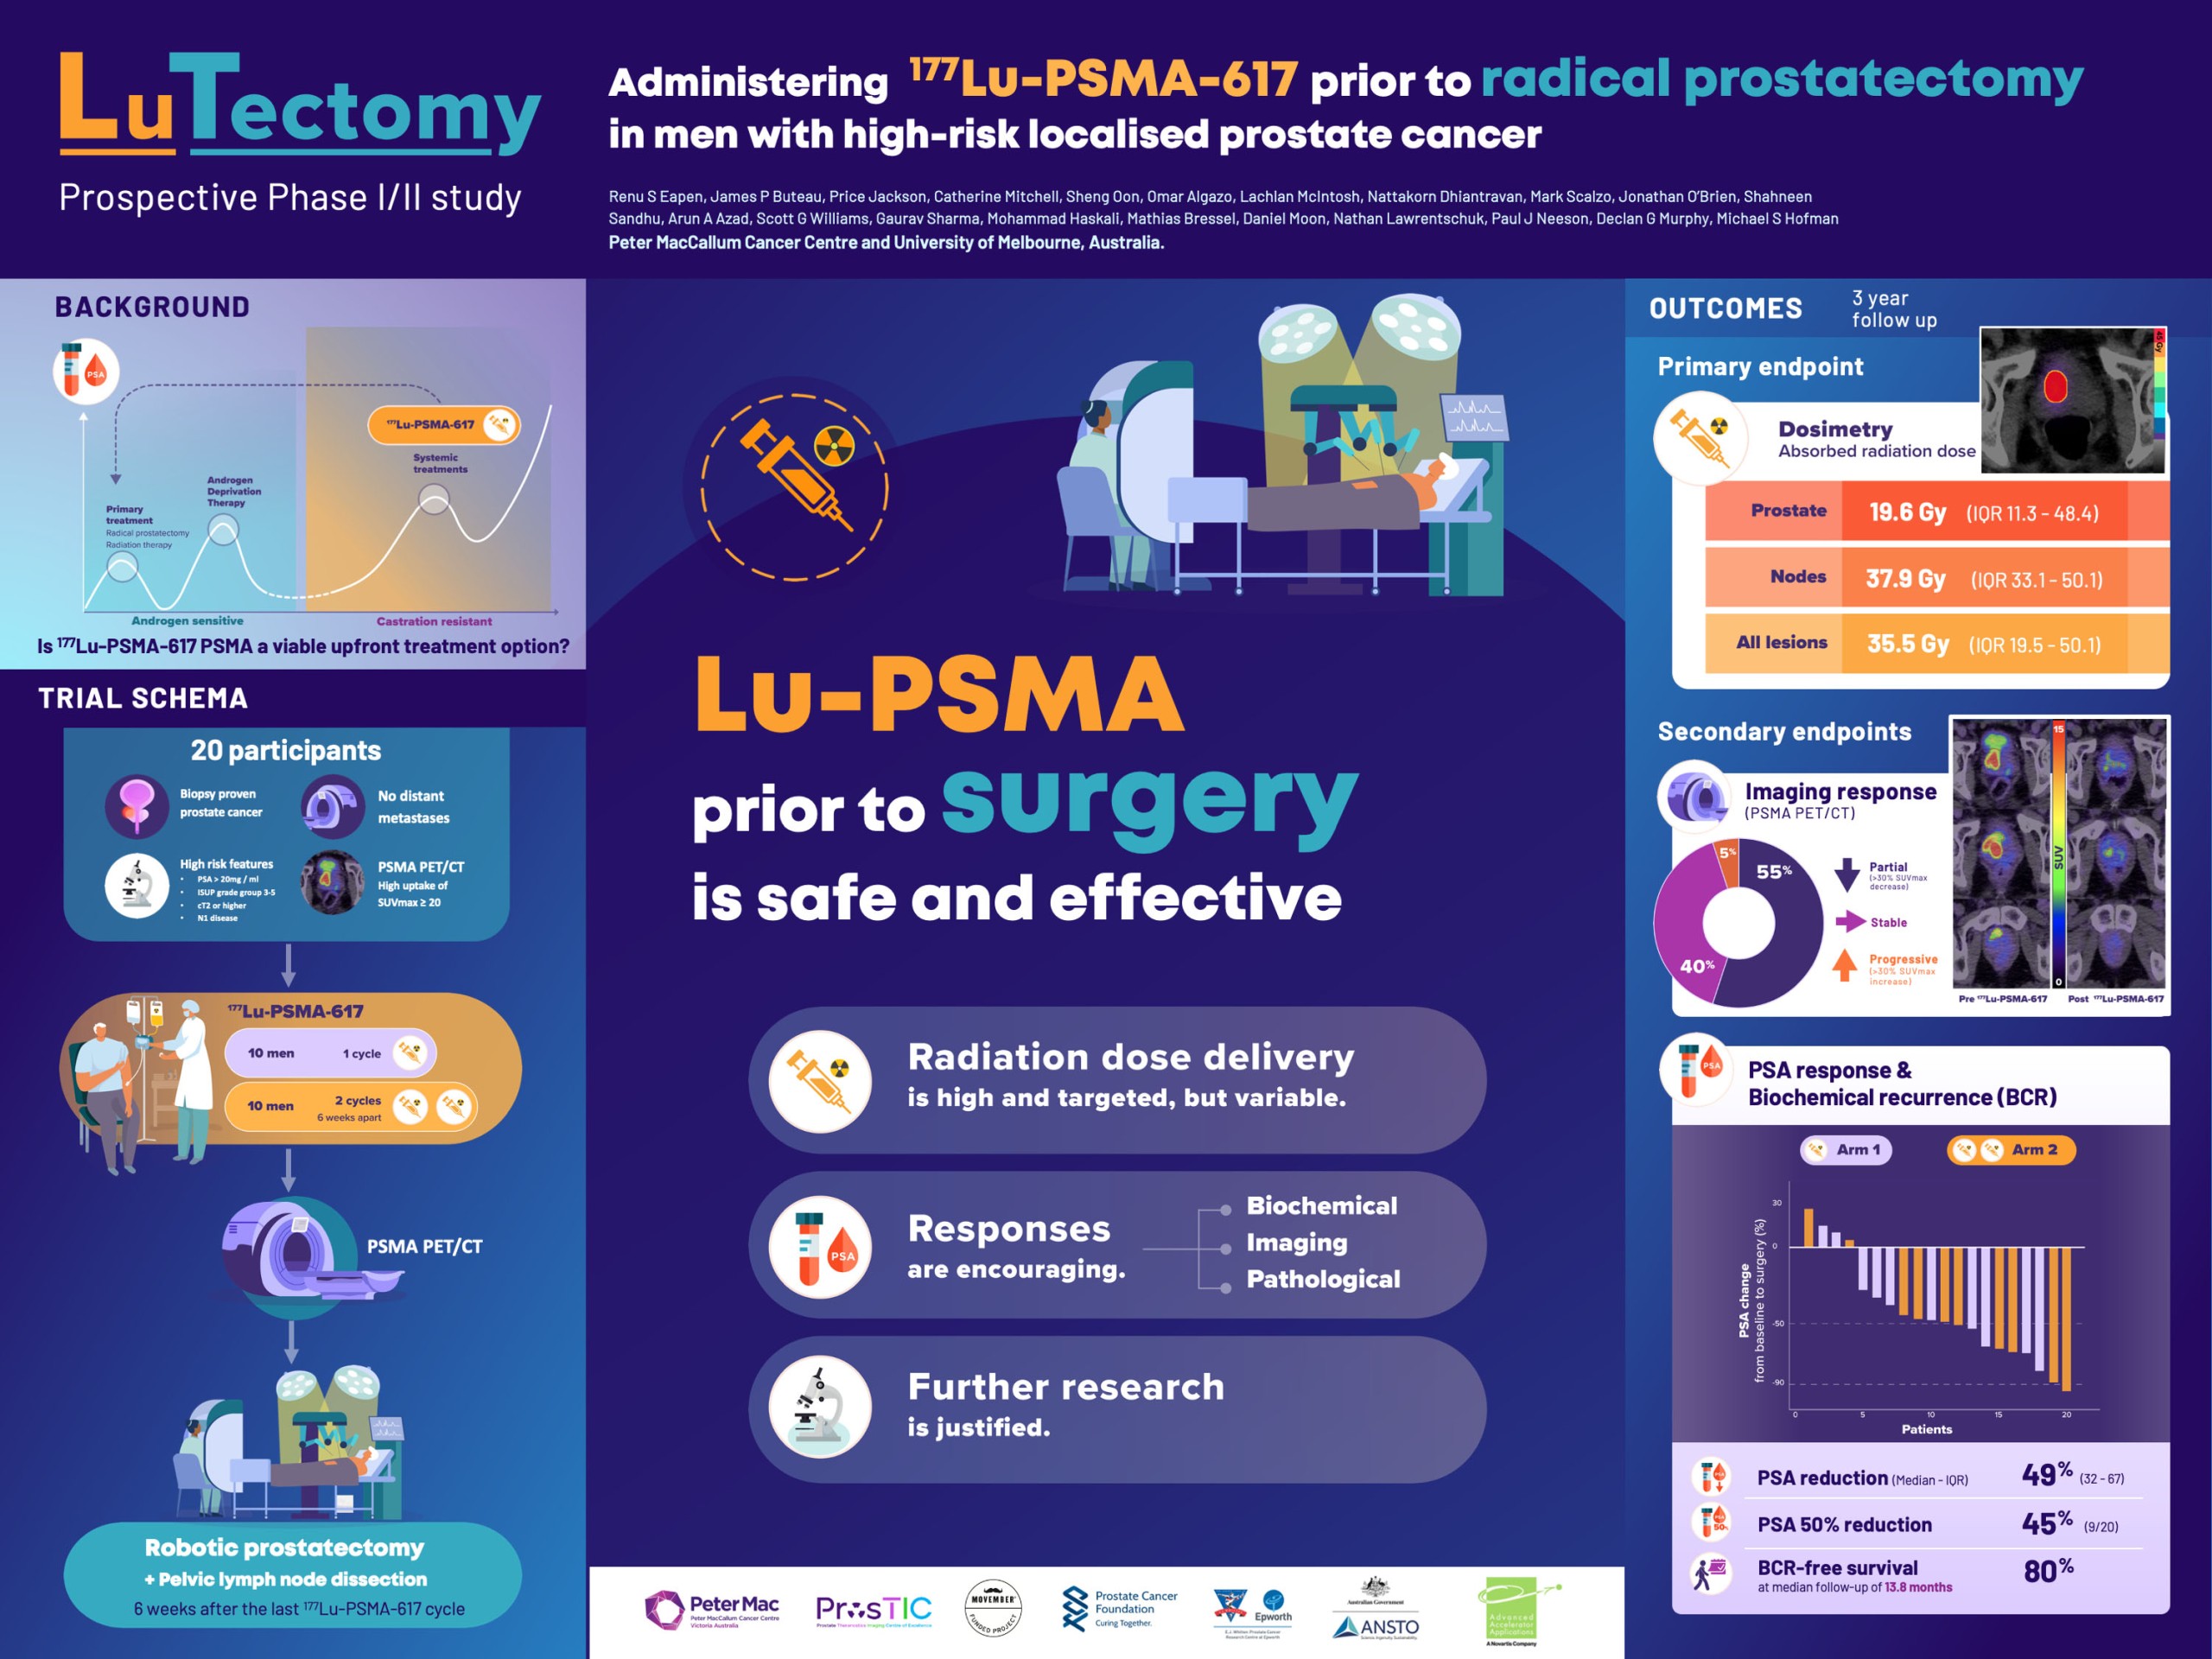 Scientific poster of the Lutectomy trial